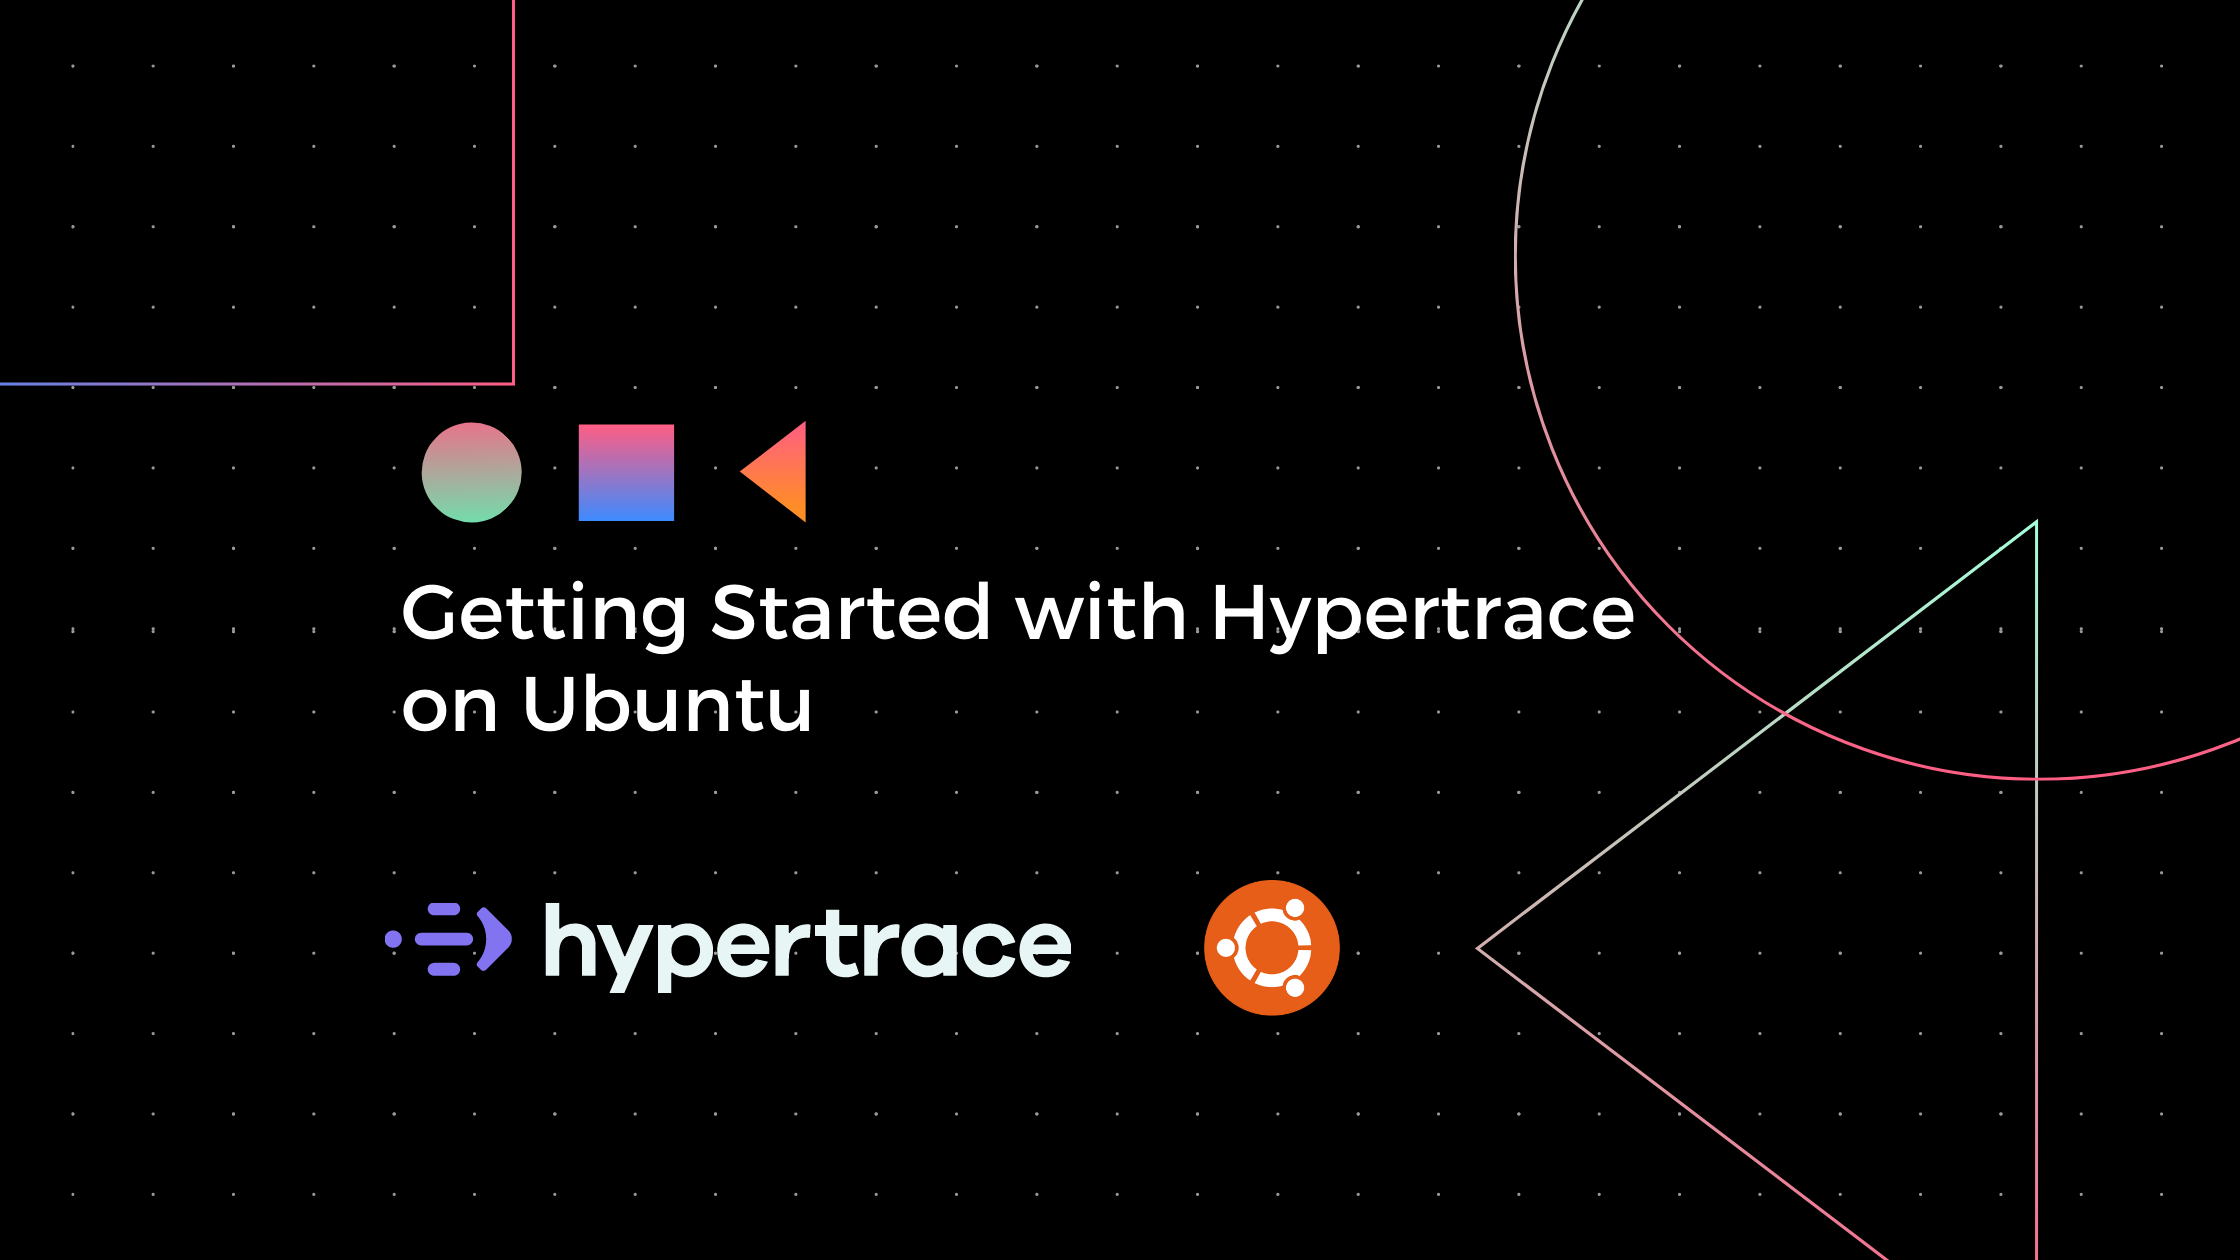 Getting started with Hypertrace on Ubuntu